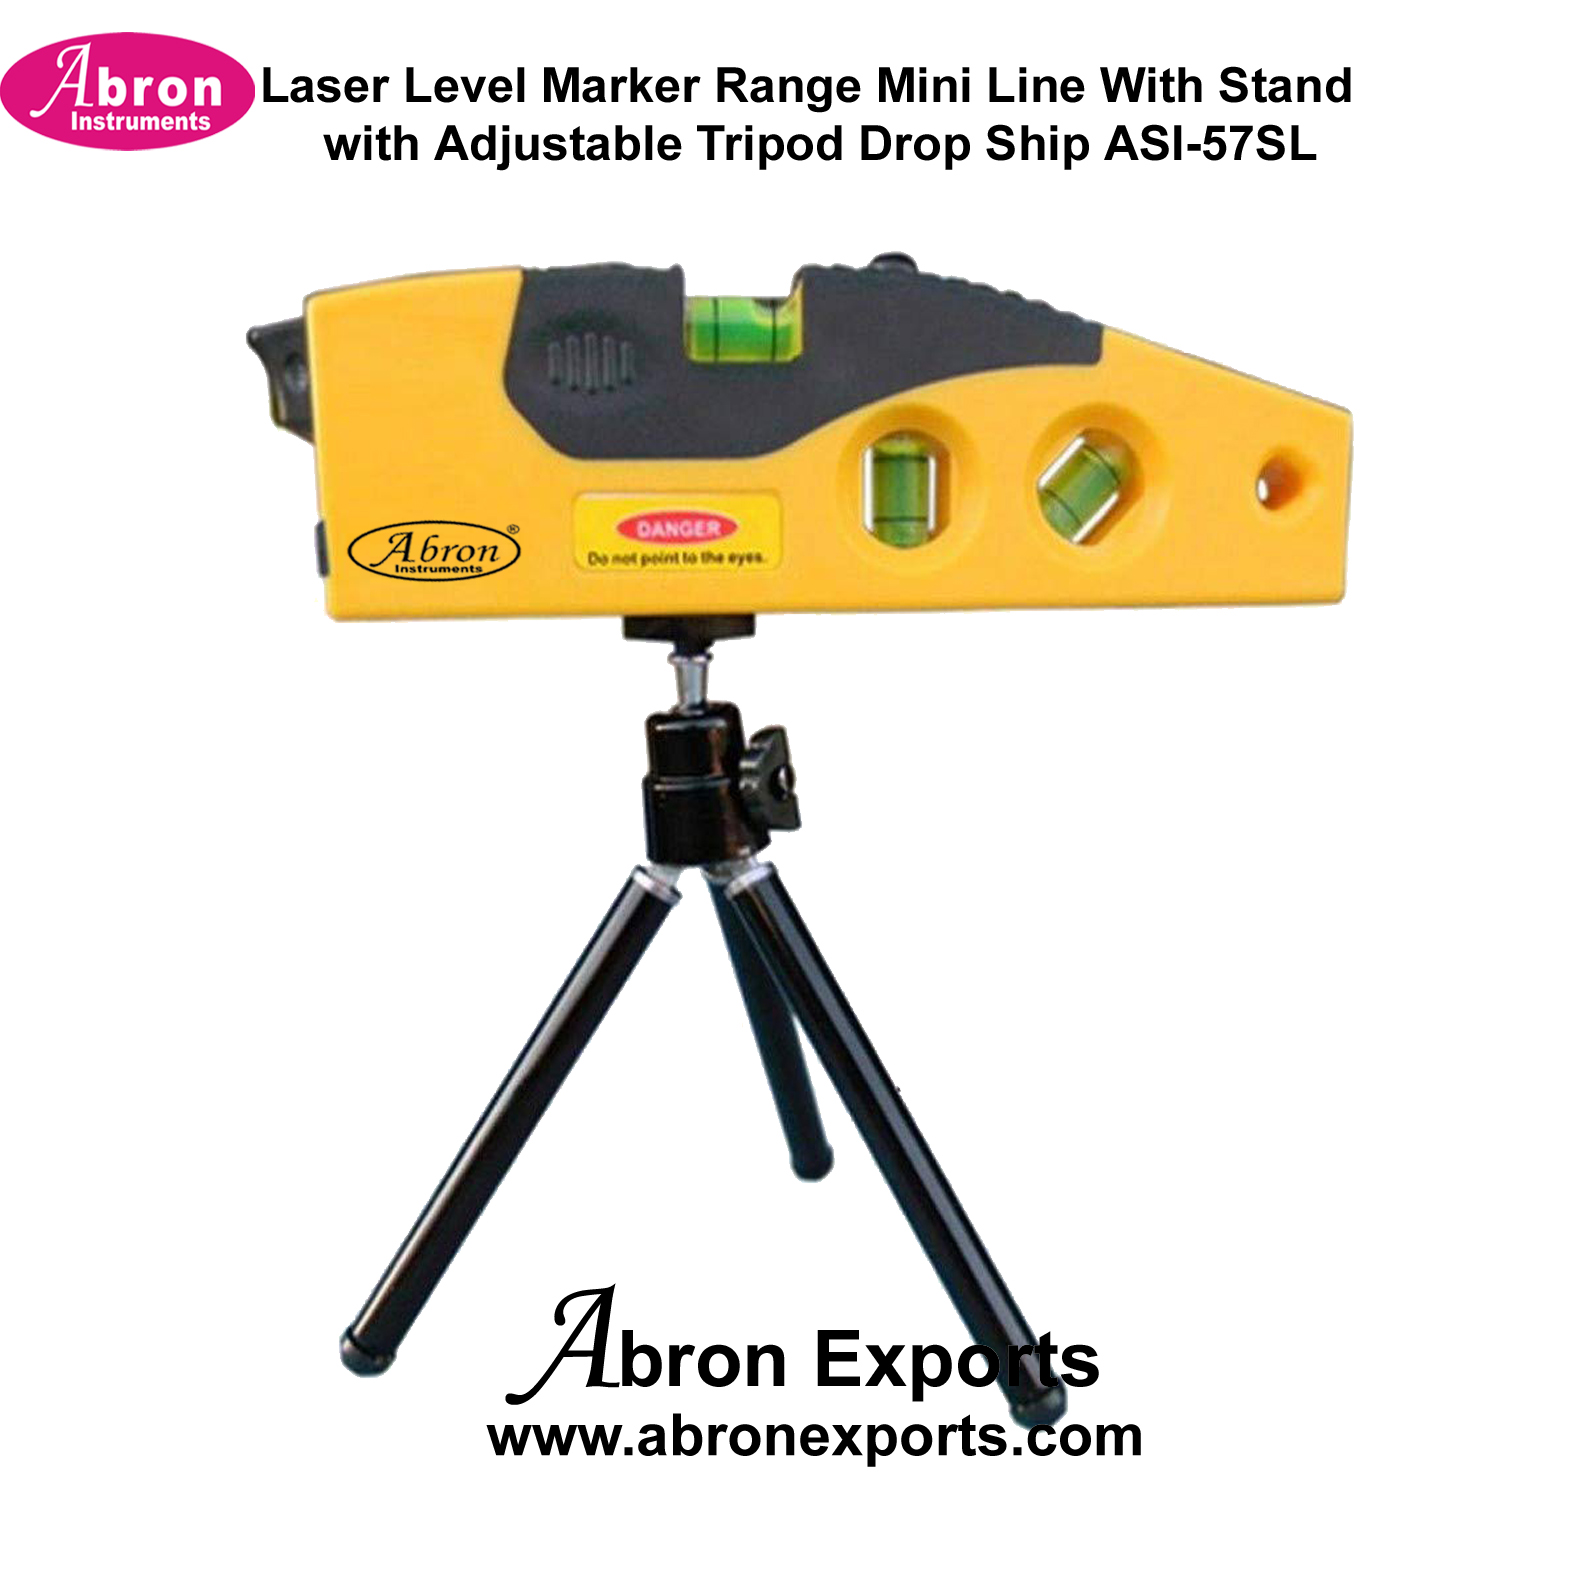 Laser Level Marker Range Mini Line With Stand with Adjustable Tripod Drop Ship ASI-57SL 